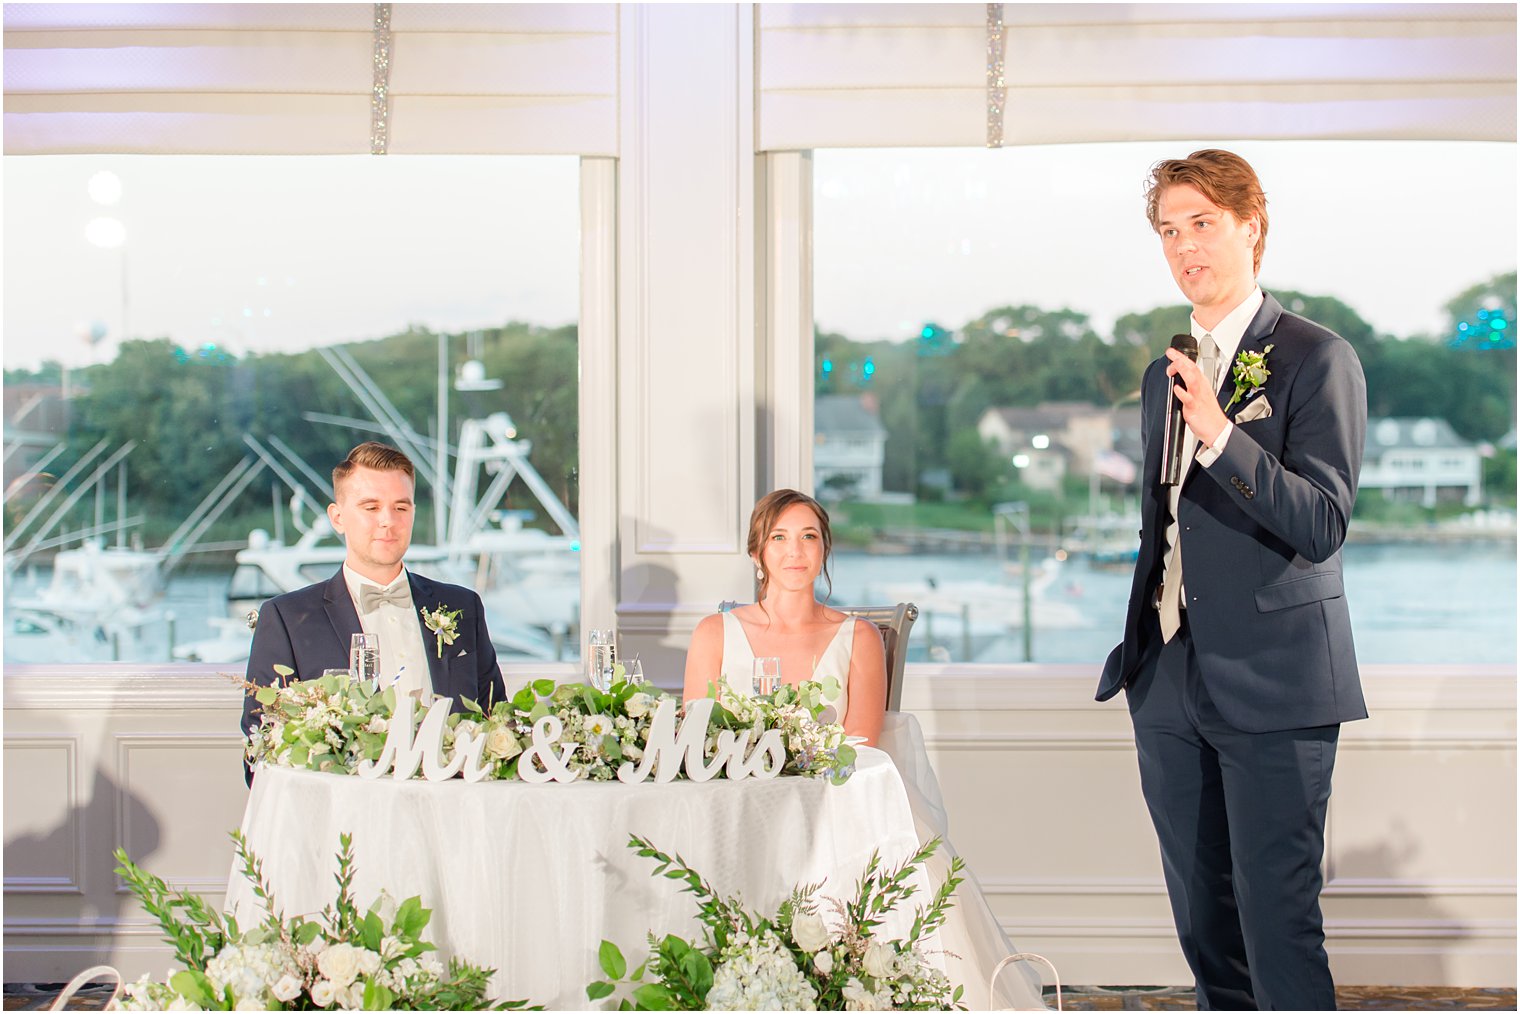 groomsman gives speech by sweetheart table with bride and groom 